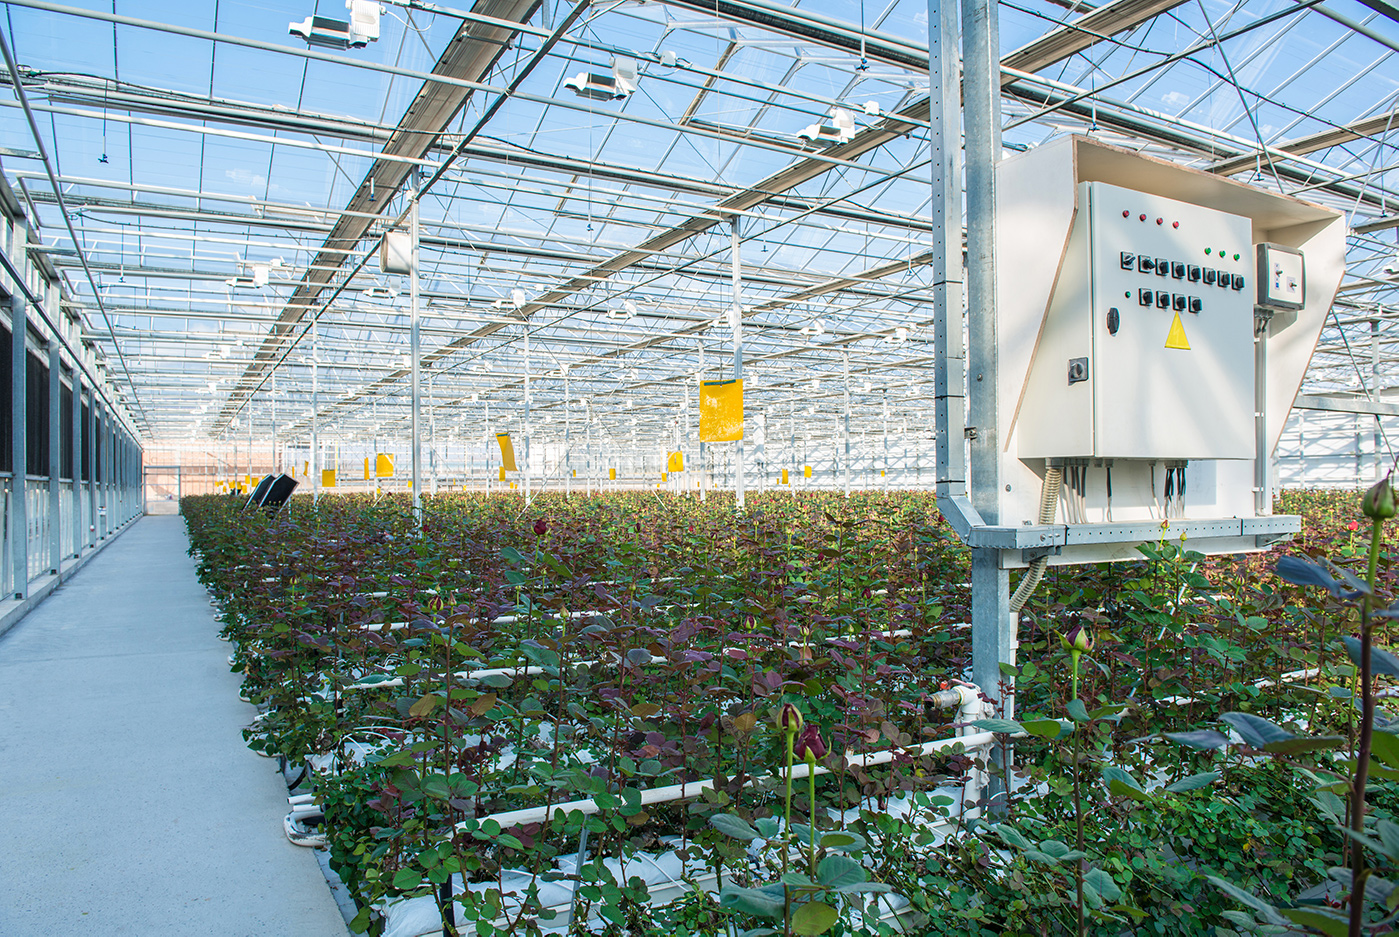 A Commercial Growing Controller System inside a Professional Greenhouse